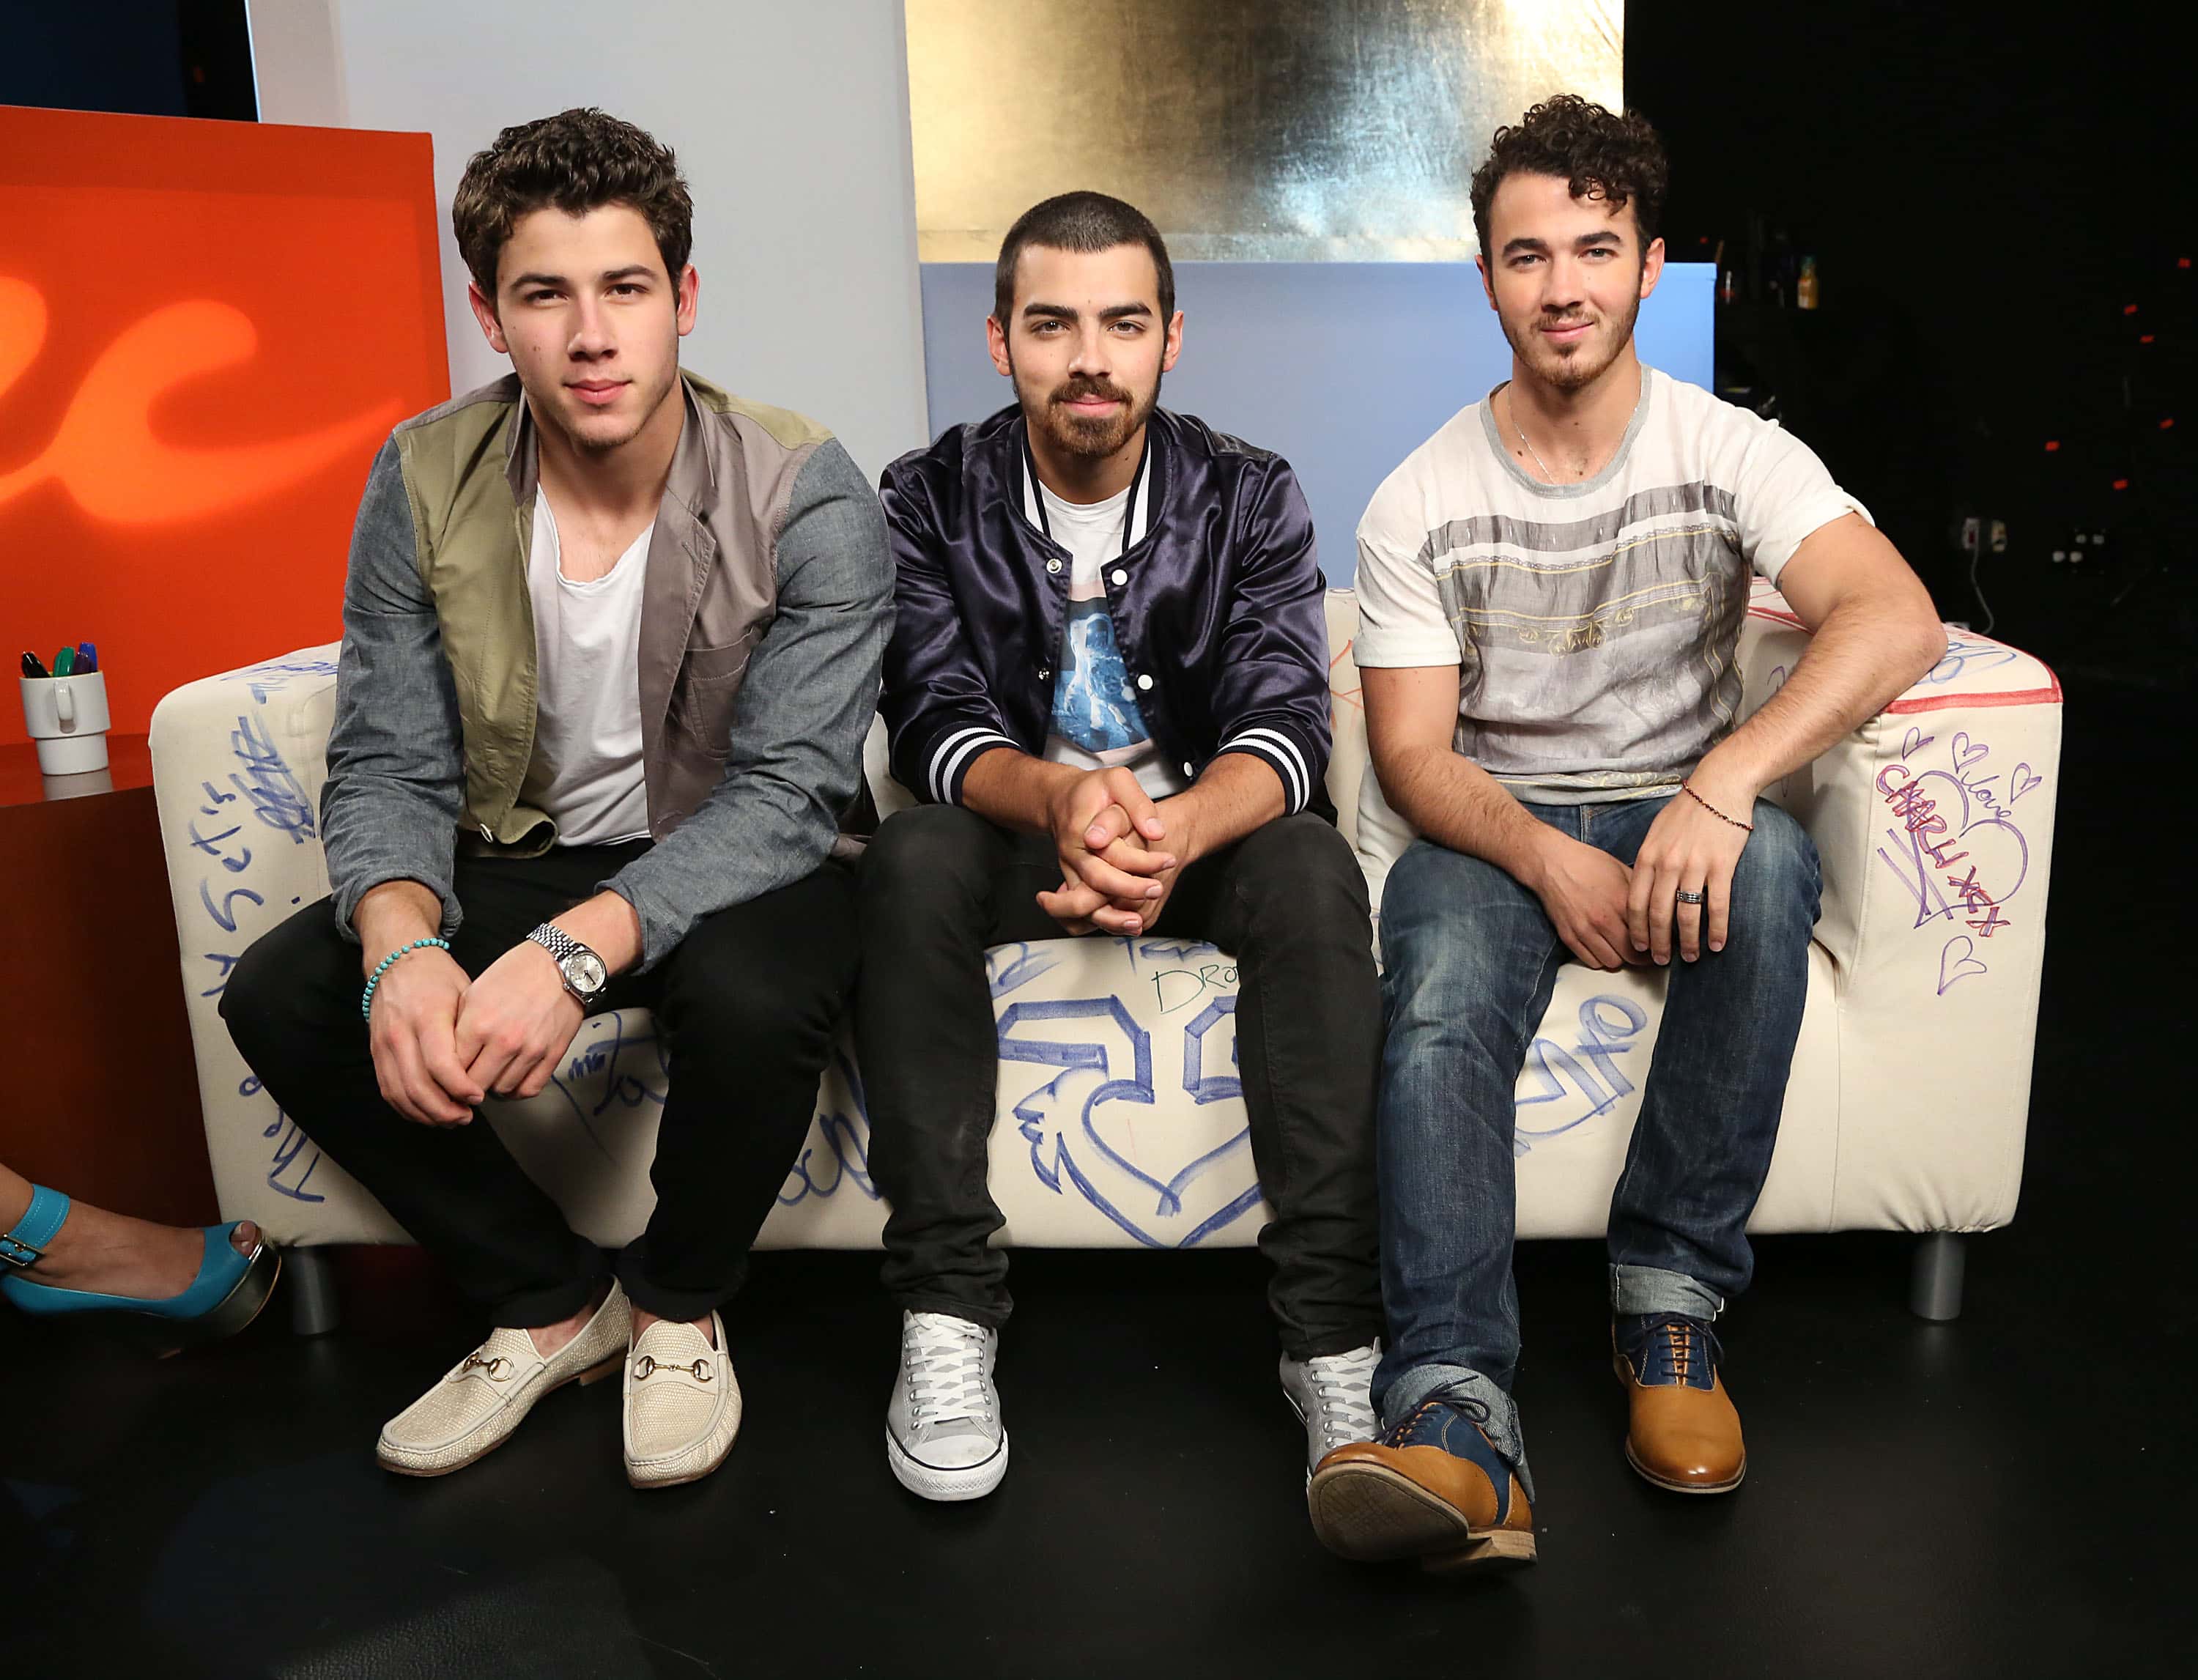 Harmonic Facts About The Jonas Brothers